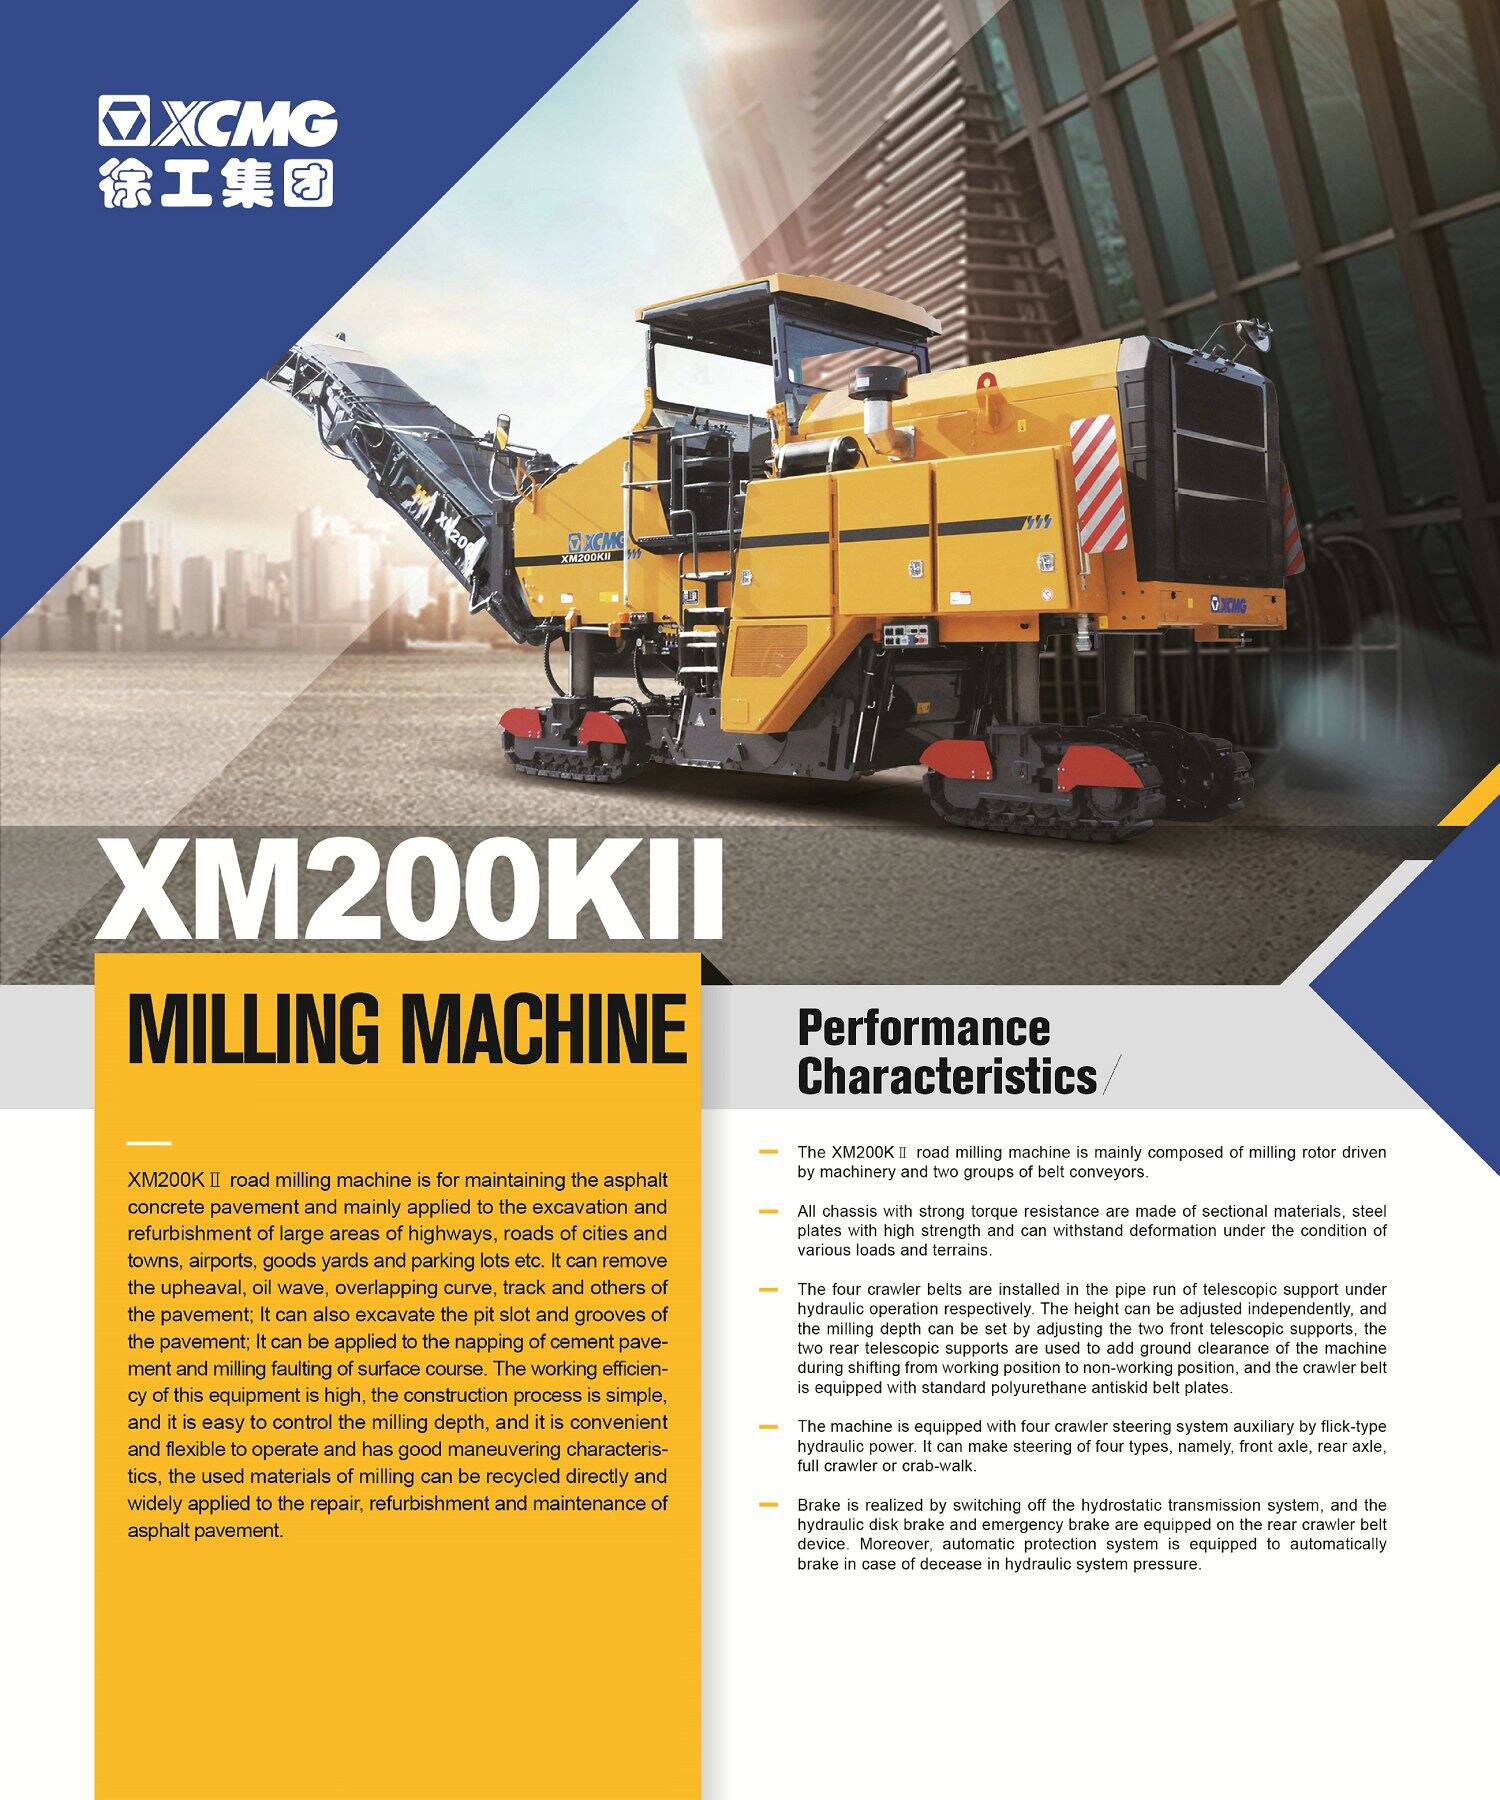 XCMG Official XM200KII Pavement Milling Machine for sale